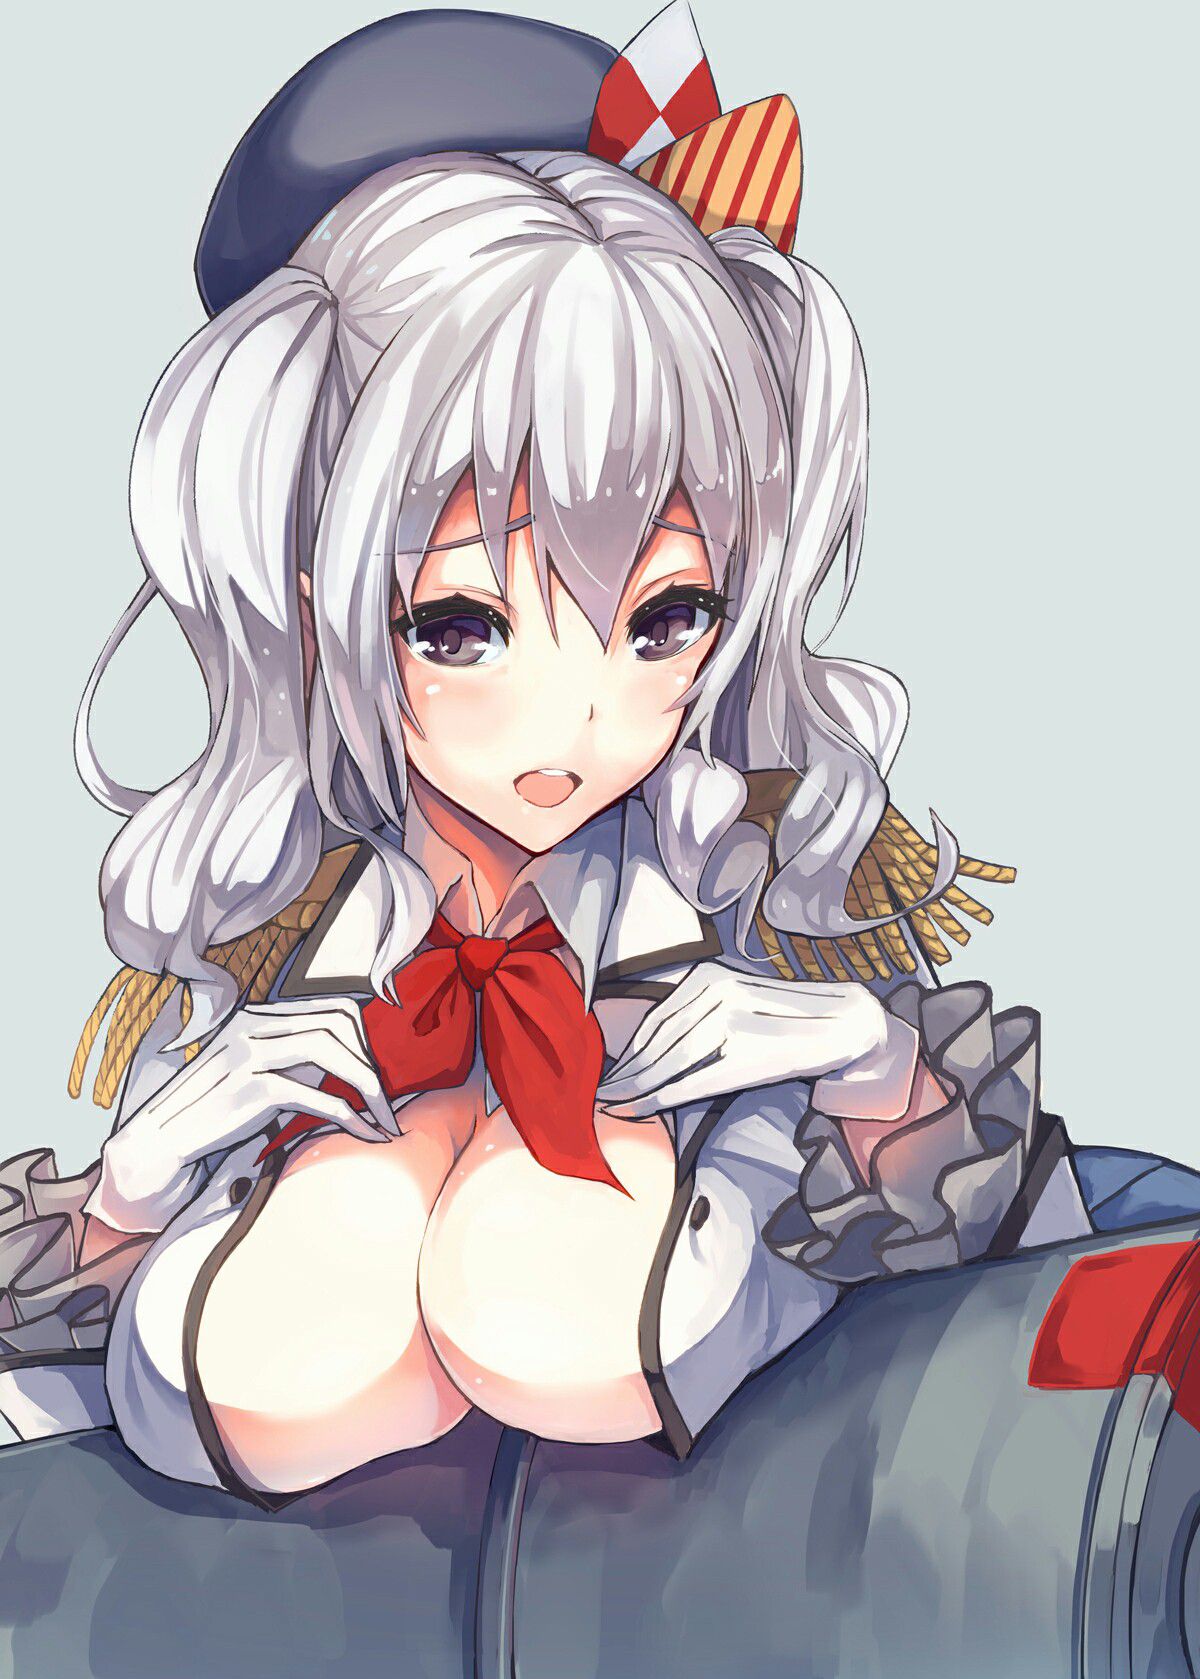 [Erotic] Ship of this new ship daughter of Kashima Image surge www wwwwww part1 26